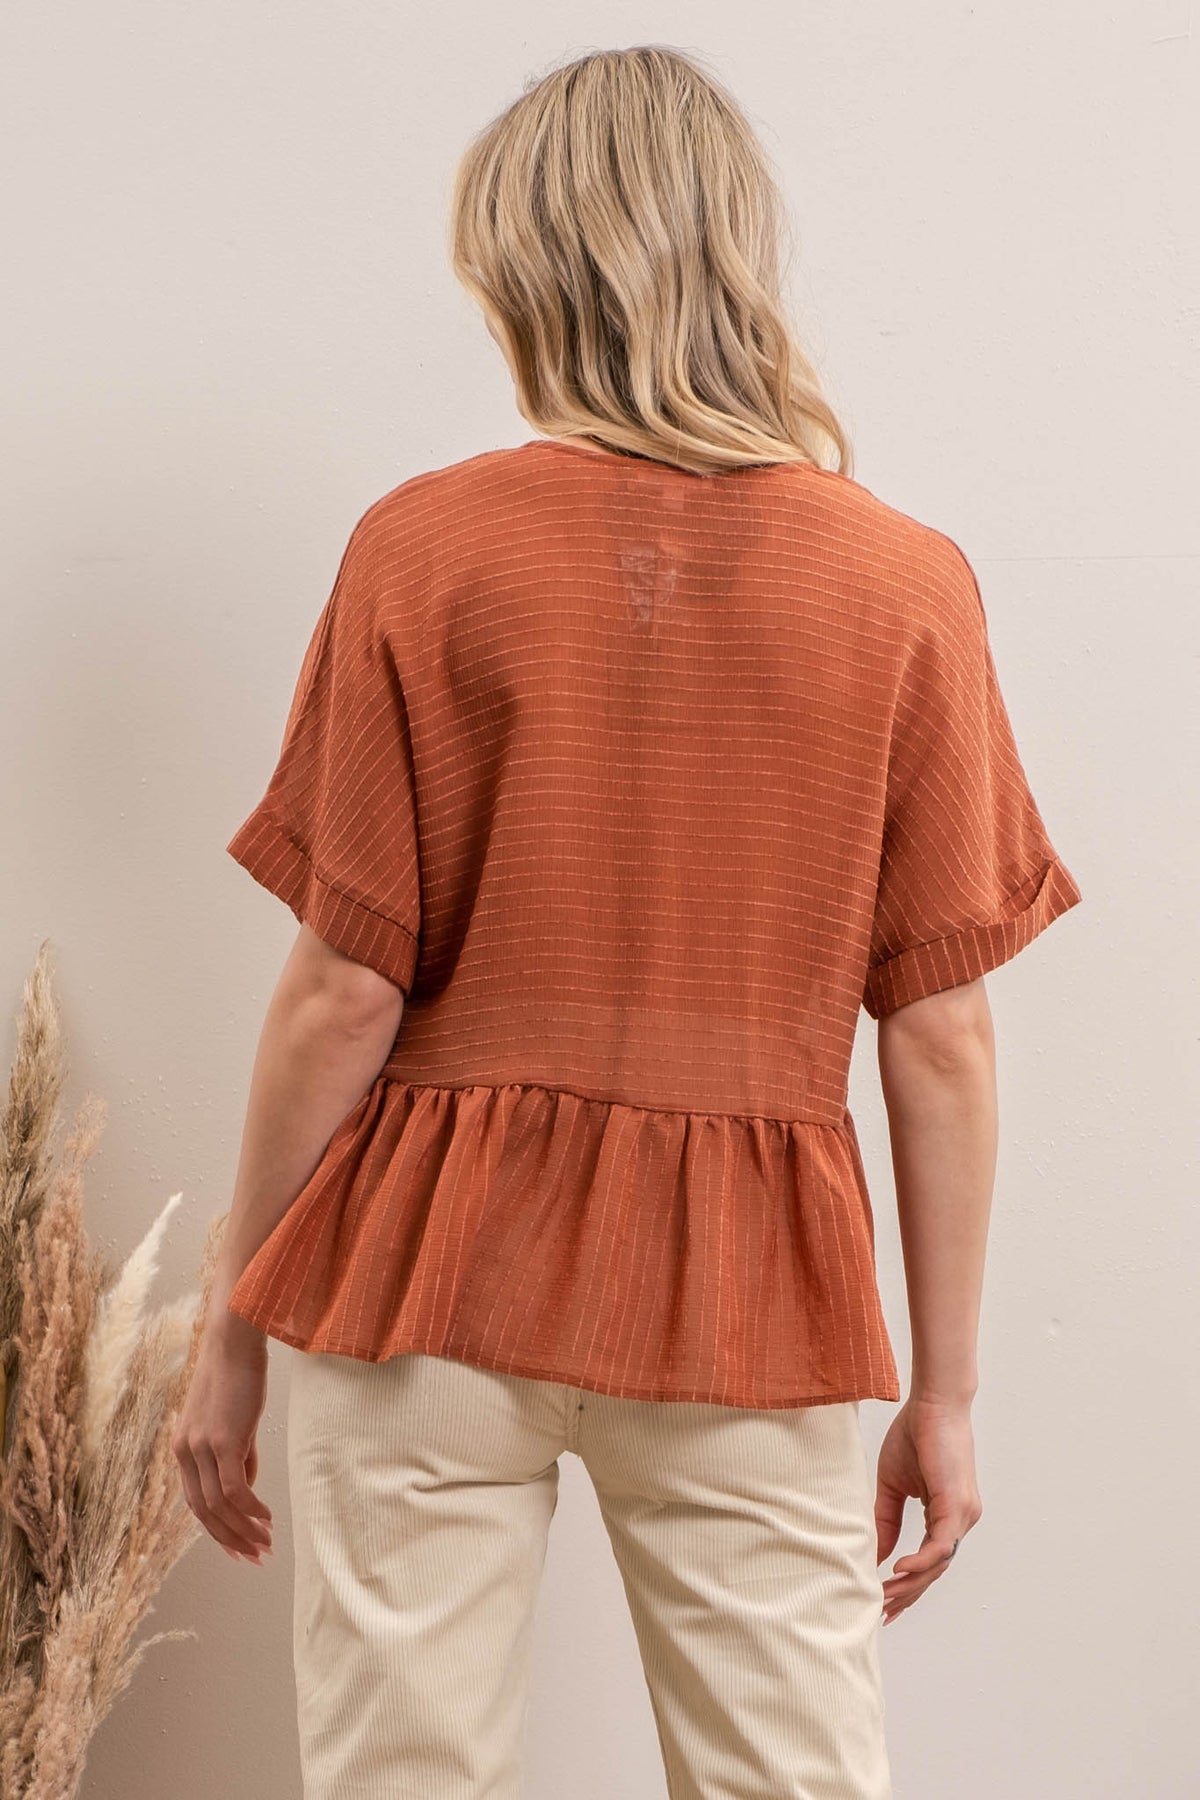 Spice Of Life Top - Copper